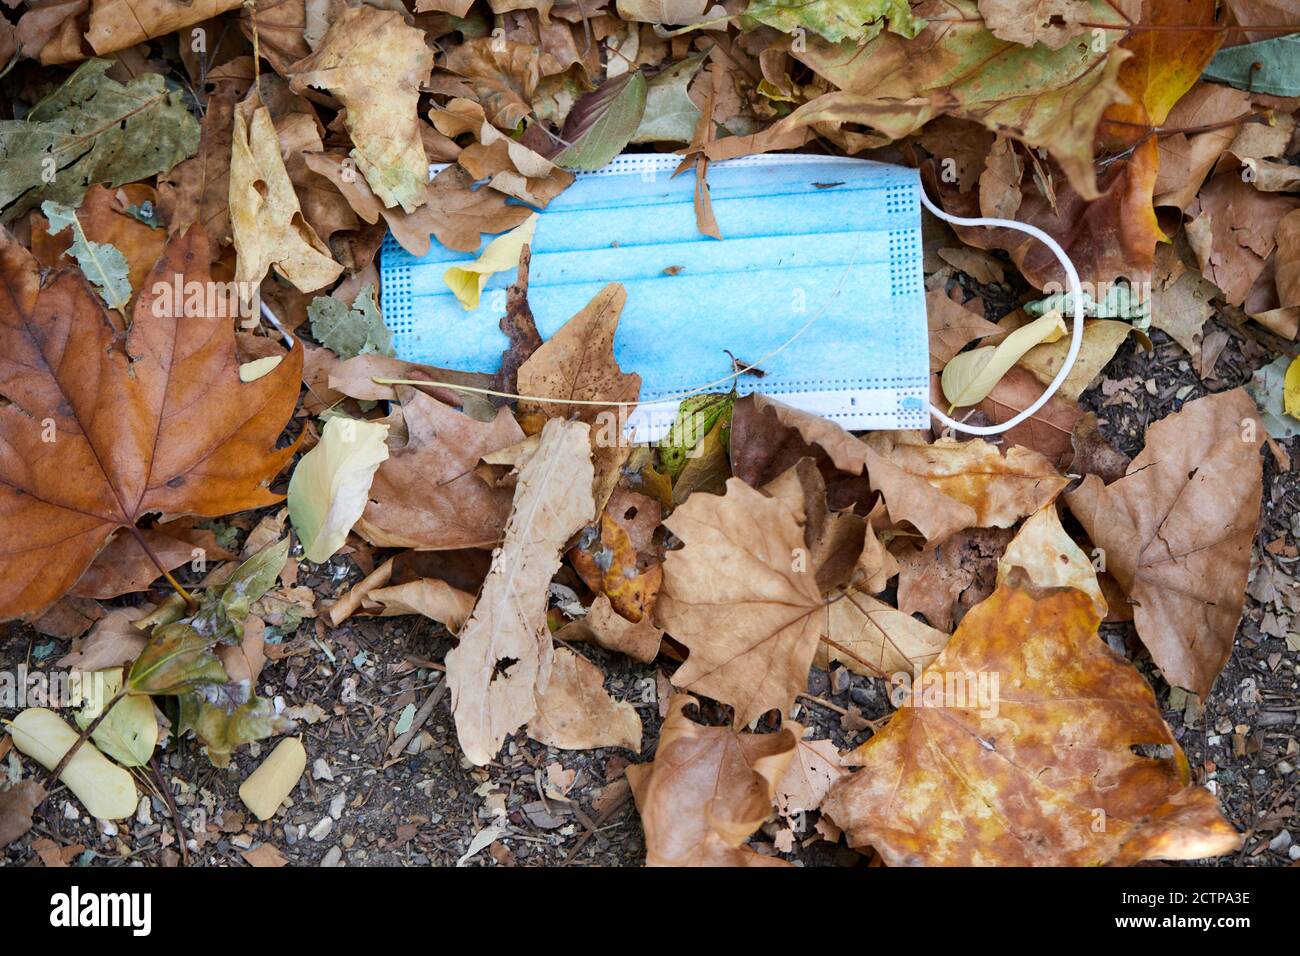 London, UK. - 18 Sept 2020: Disposable face masks, discarded in the street, make an addition to the sweepings of this year's autumn leaf fall as a result of the coronavirus pandemic. Stock Photo